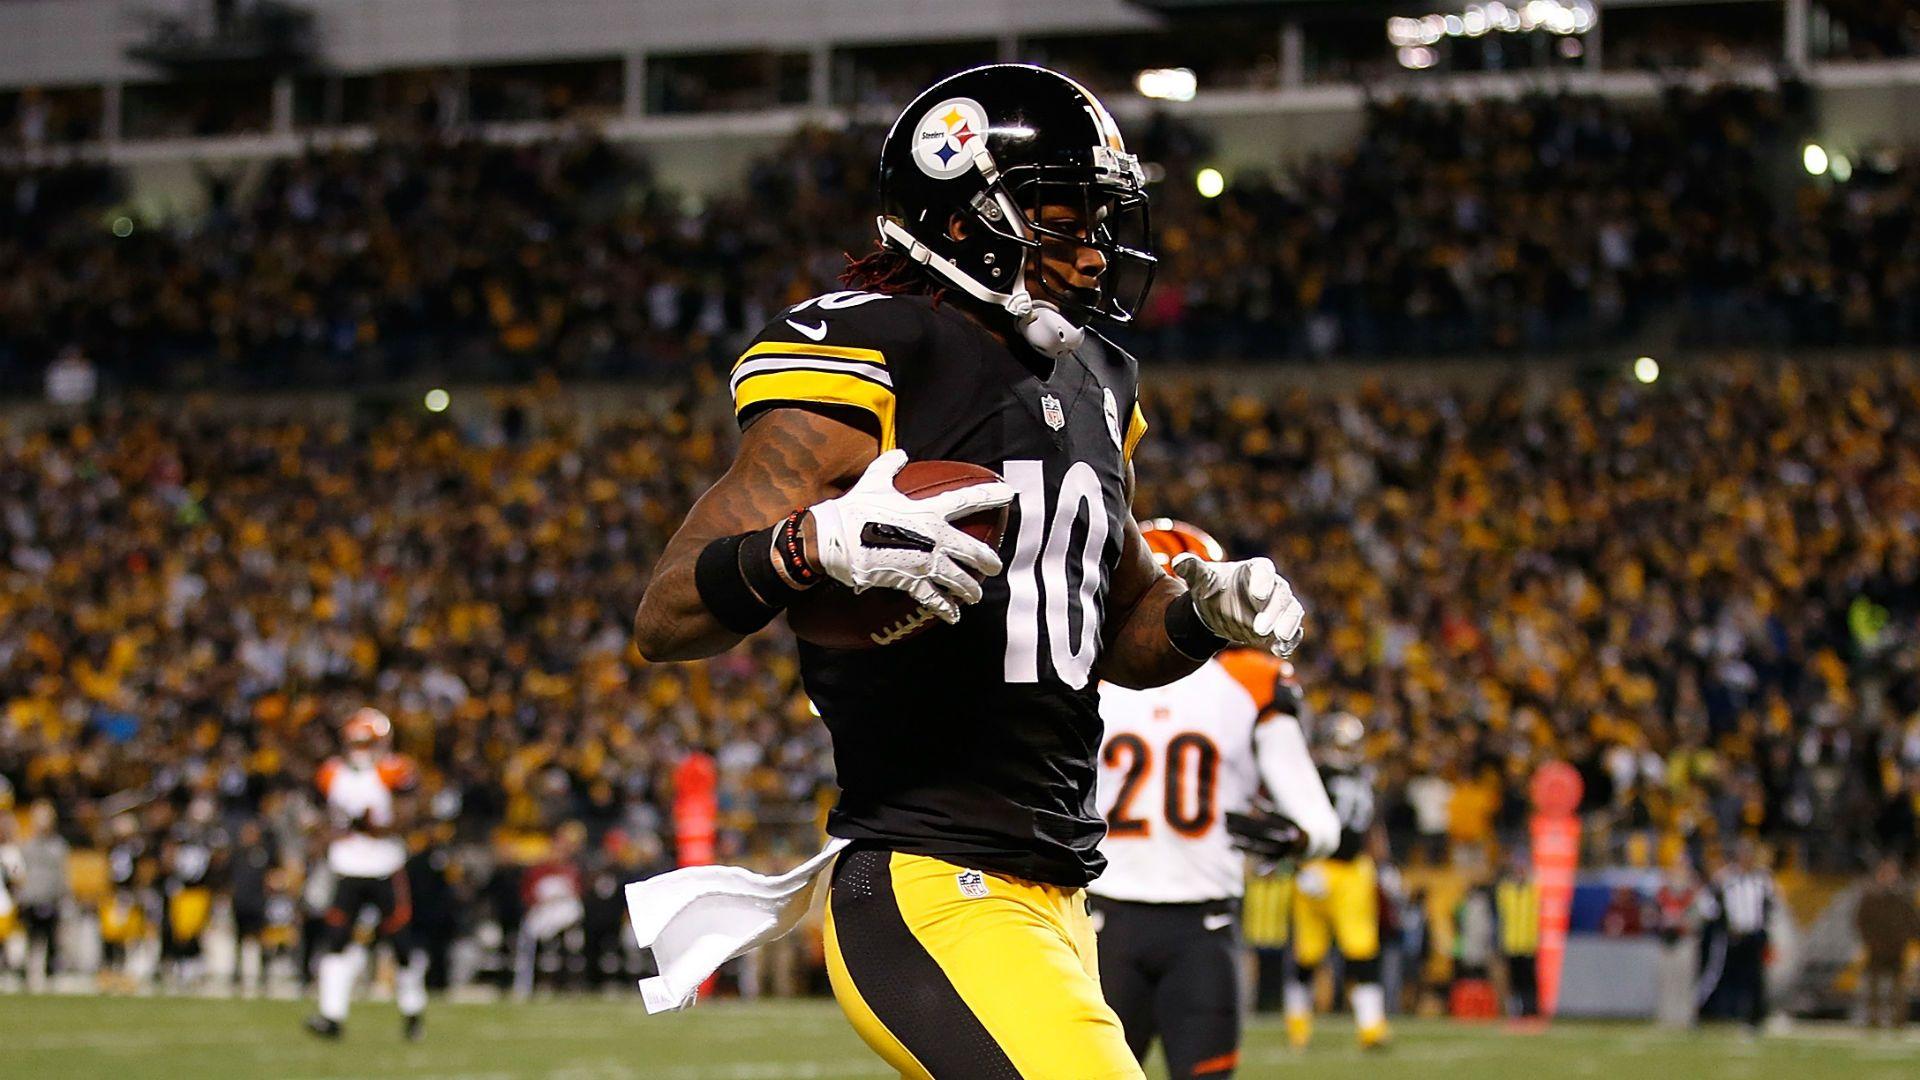 There's growing concern Steelers' Martavis Bryant won't play vs